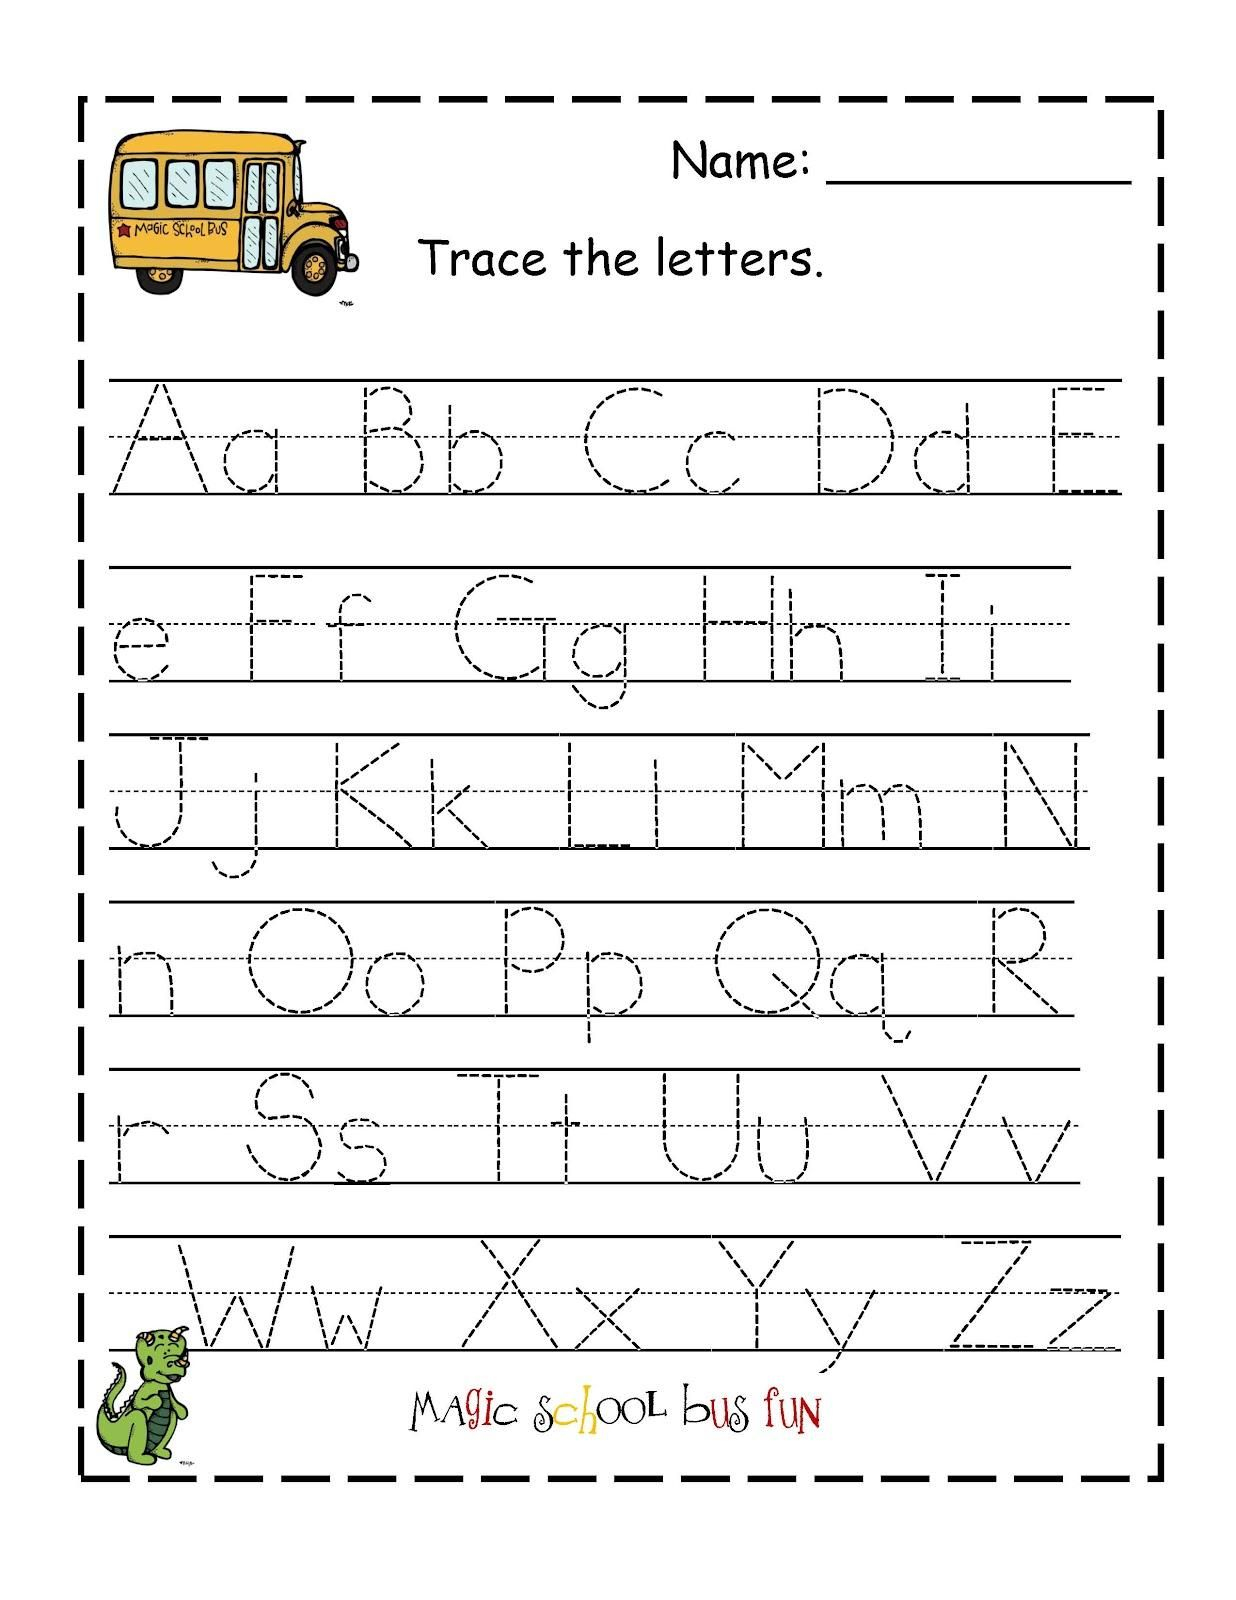 51 Alphabet Worksheets For 4 Year Olds In 2020 | Alphabet in Alphabet Worksheets For 4 Year Olds